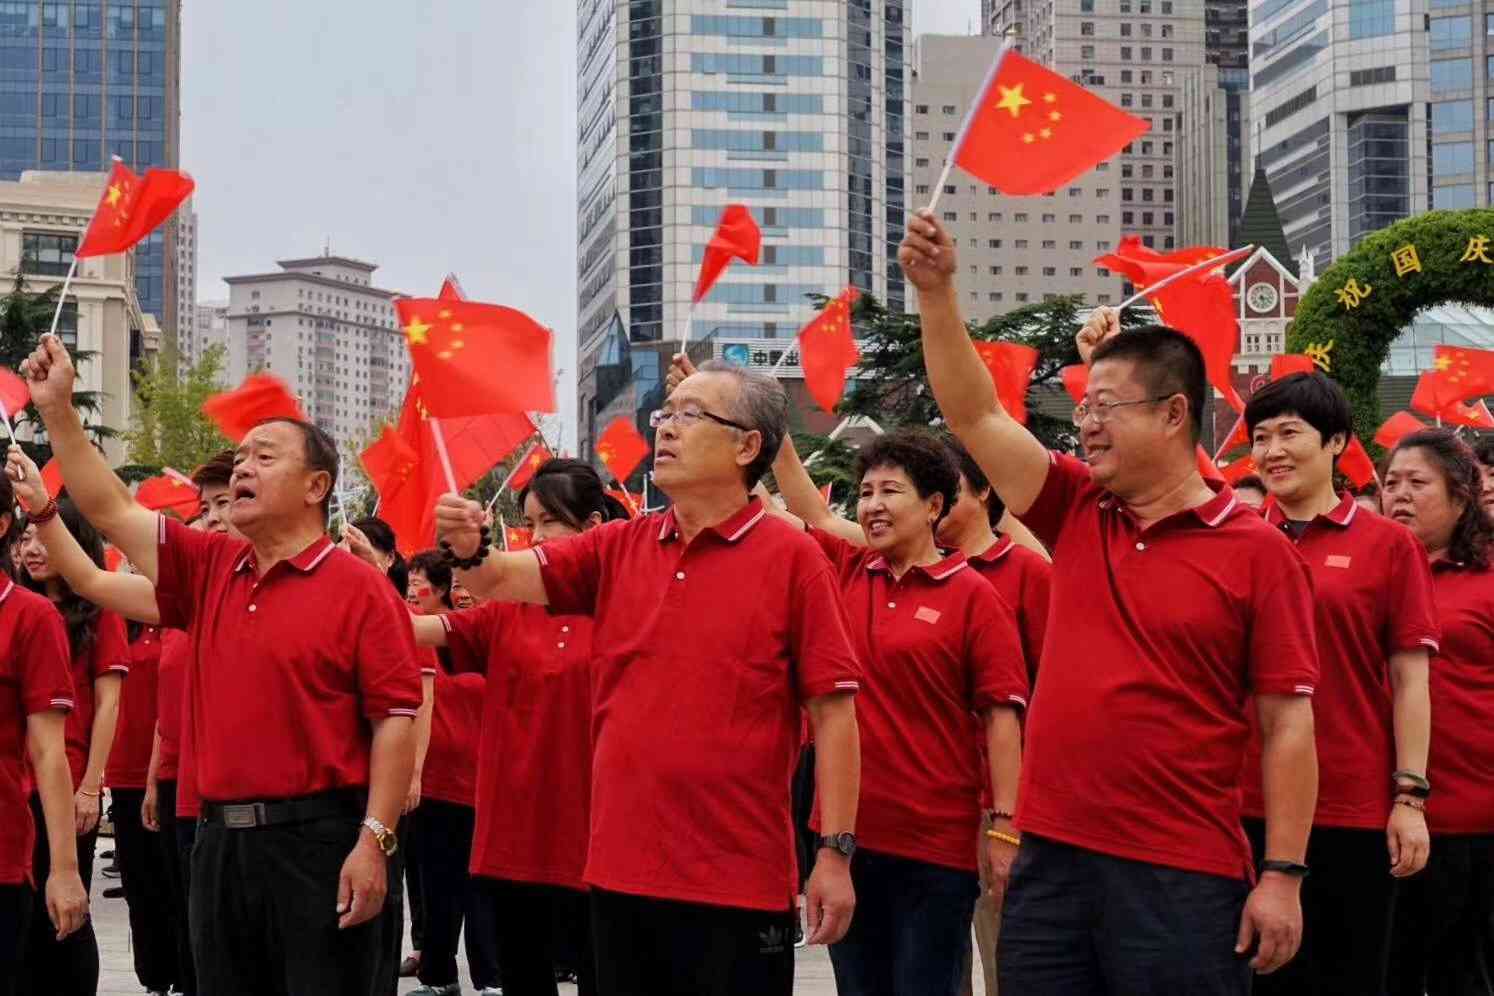 The 70th anniversary of the founding of the People's Republic of China